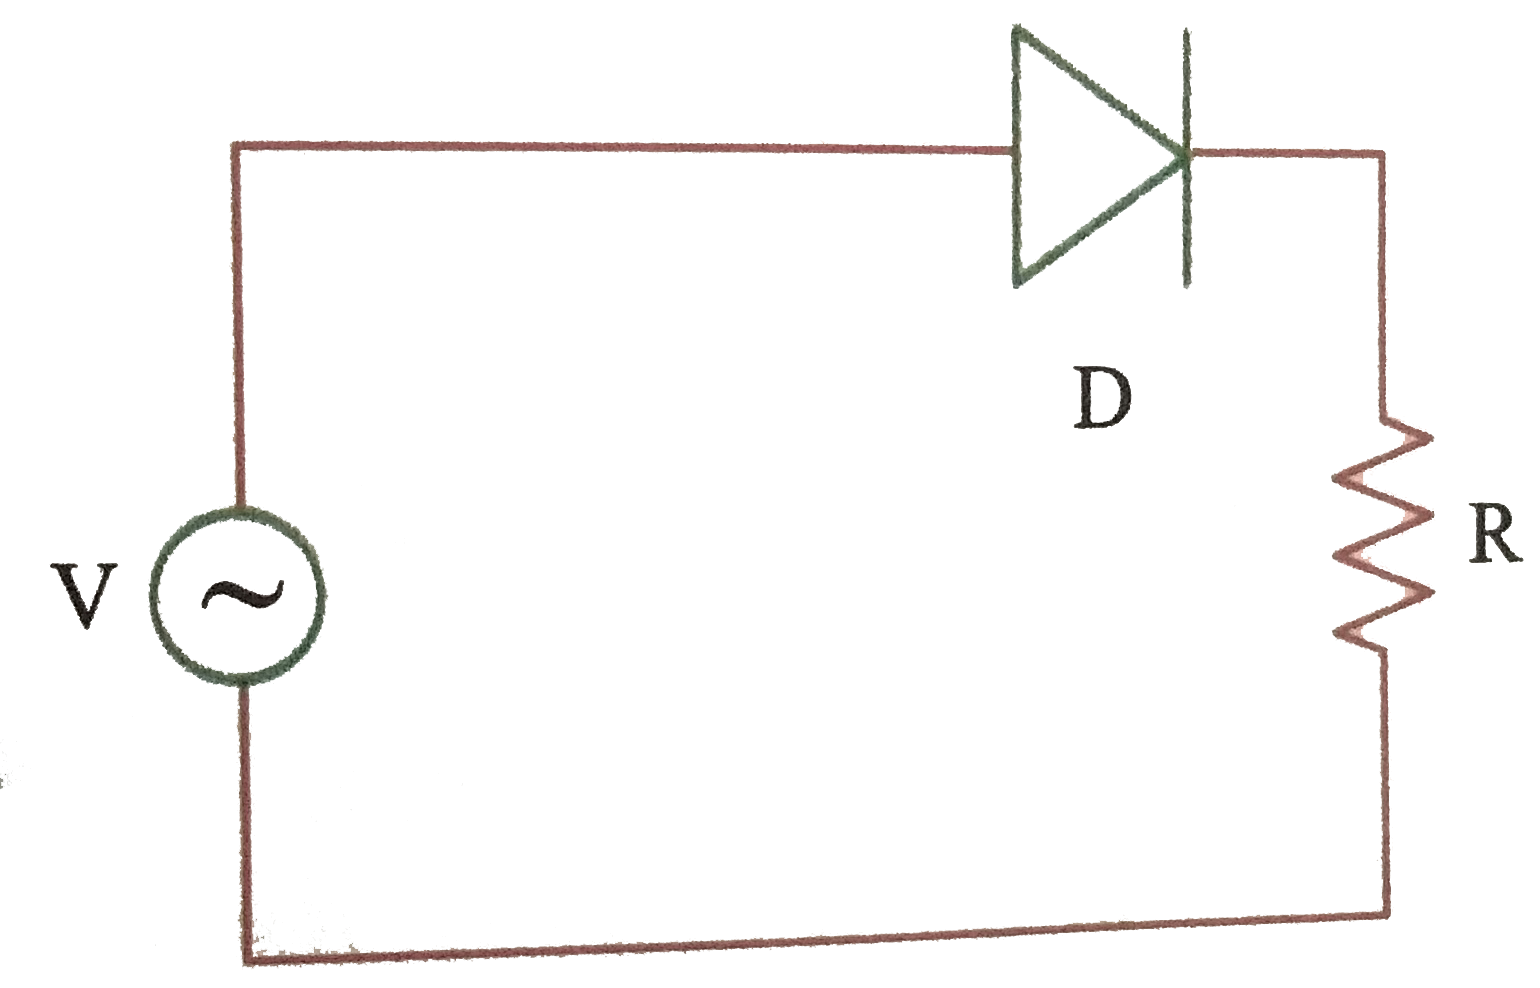 A p-n junction (D) shown in the figure can act as a rectifier. An alternating current source (V) is connected in the circuit.   .